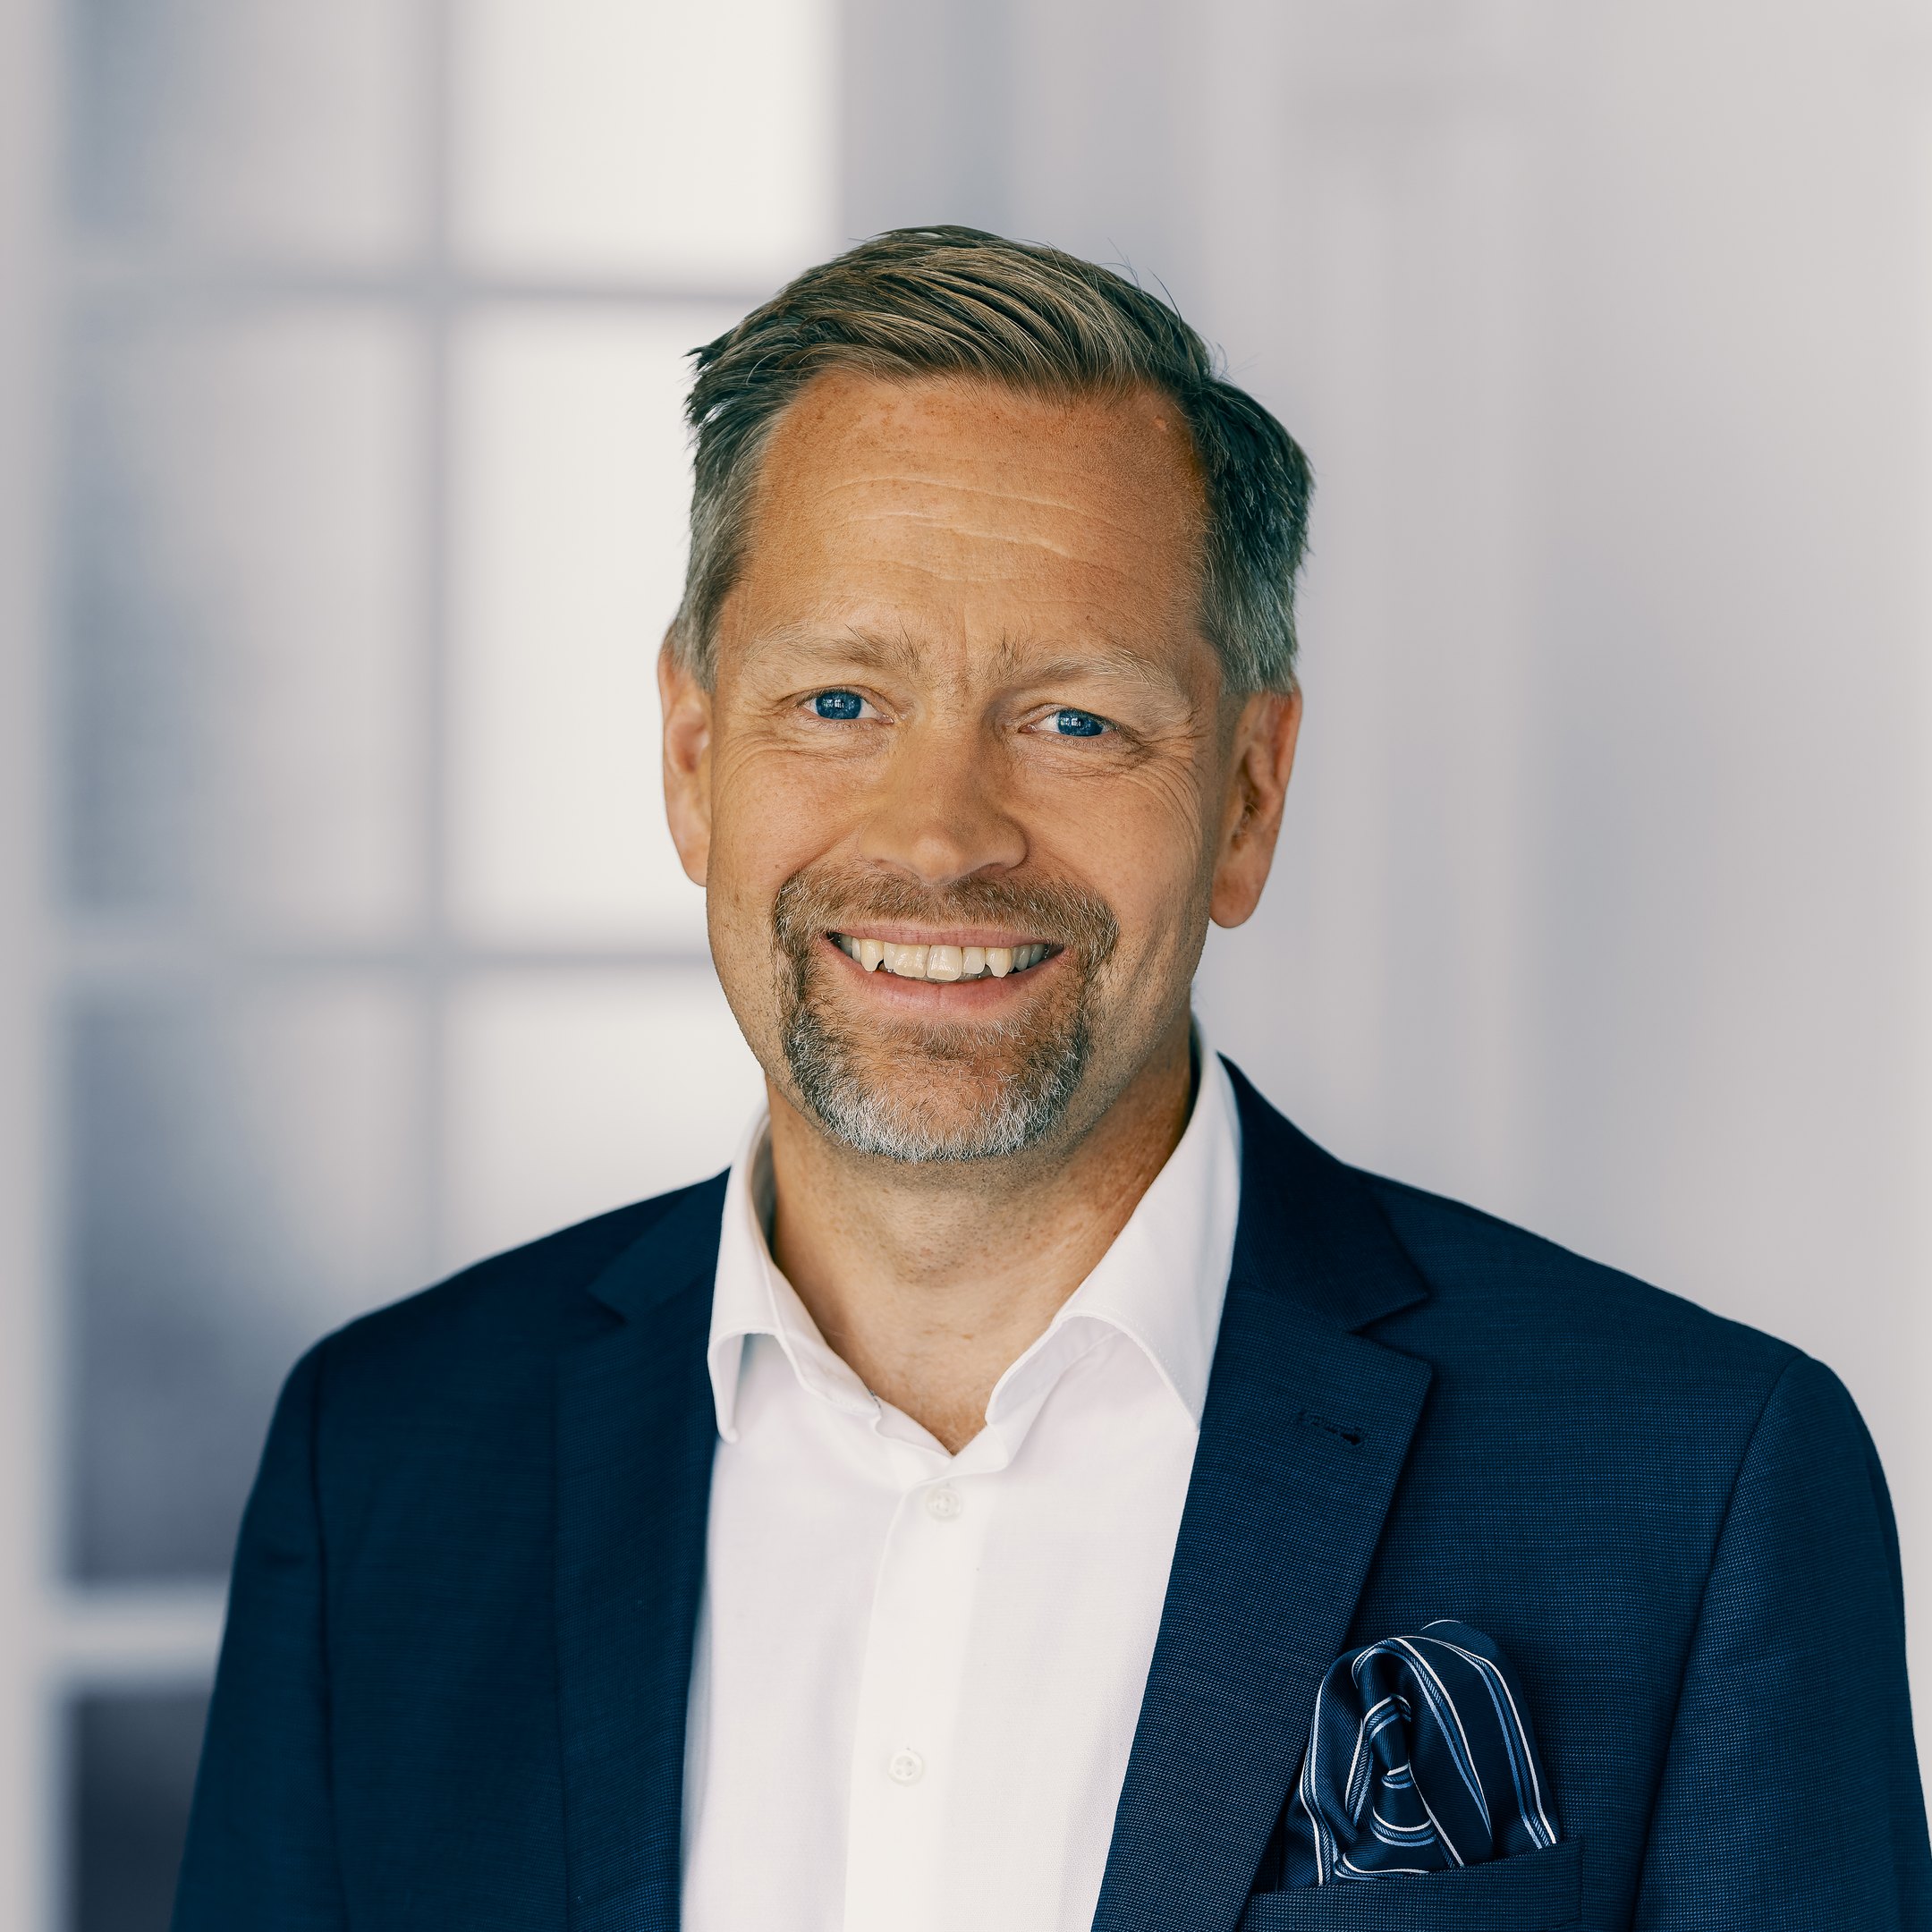 Teemu Salmi, CEO of DNV’s new cyber security services business